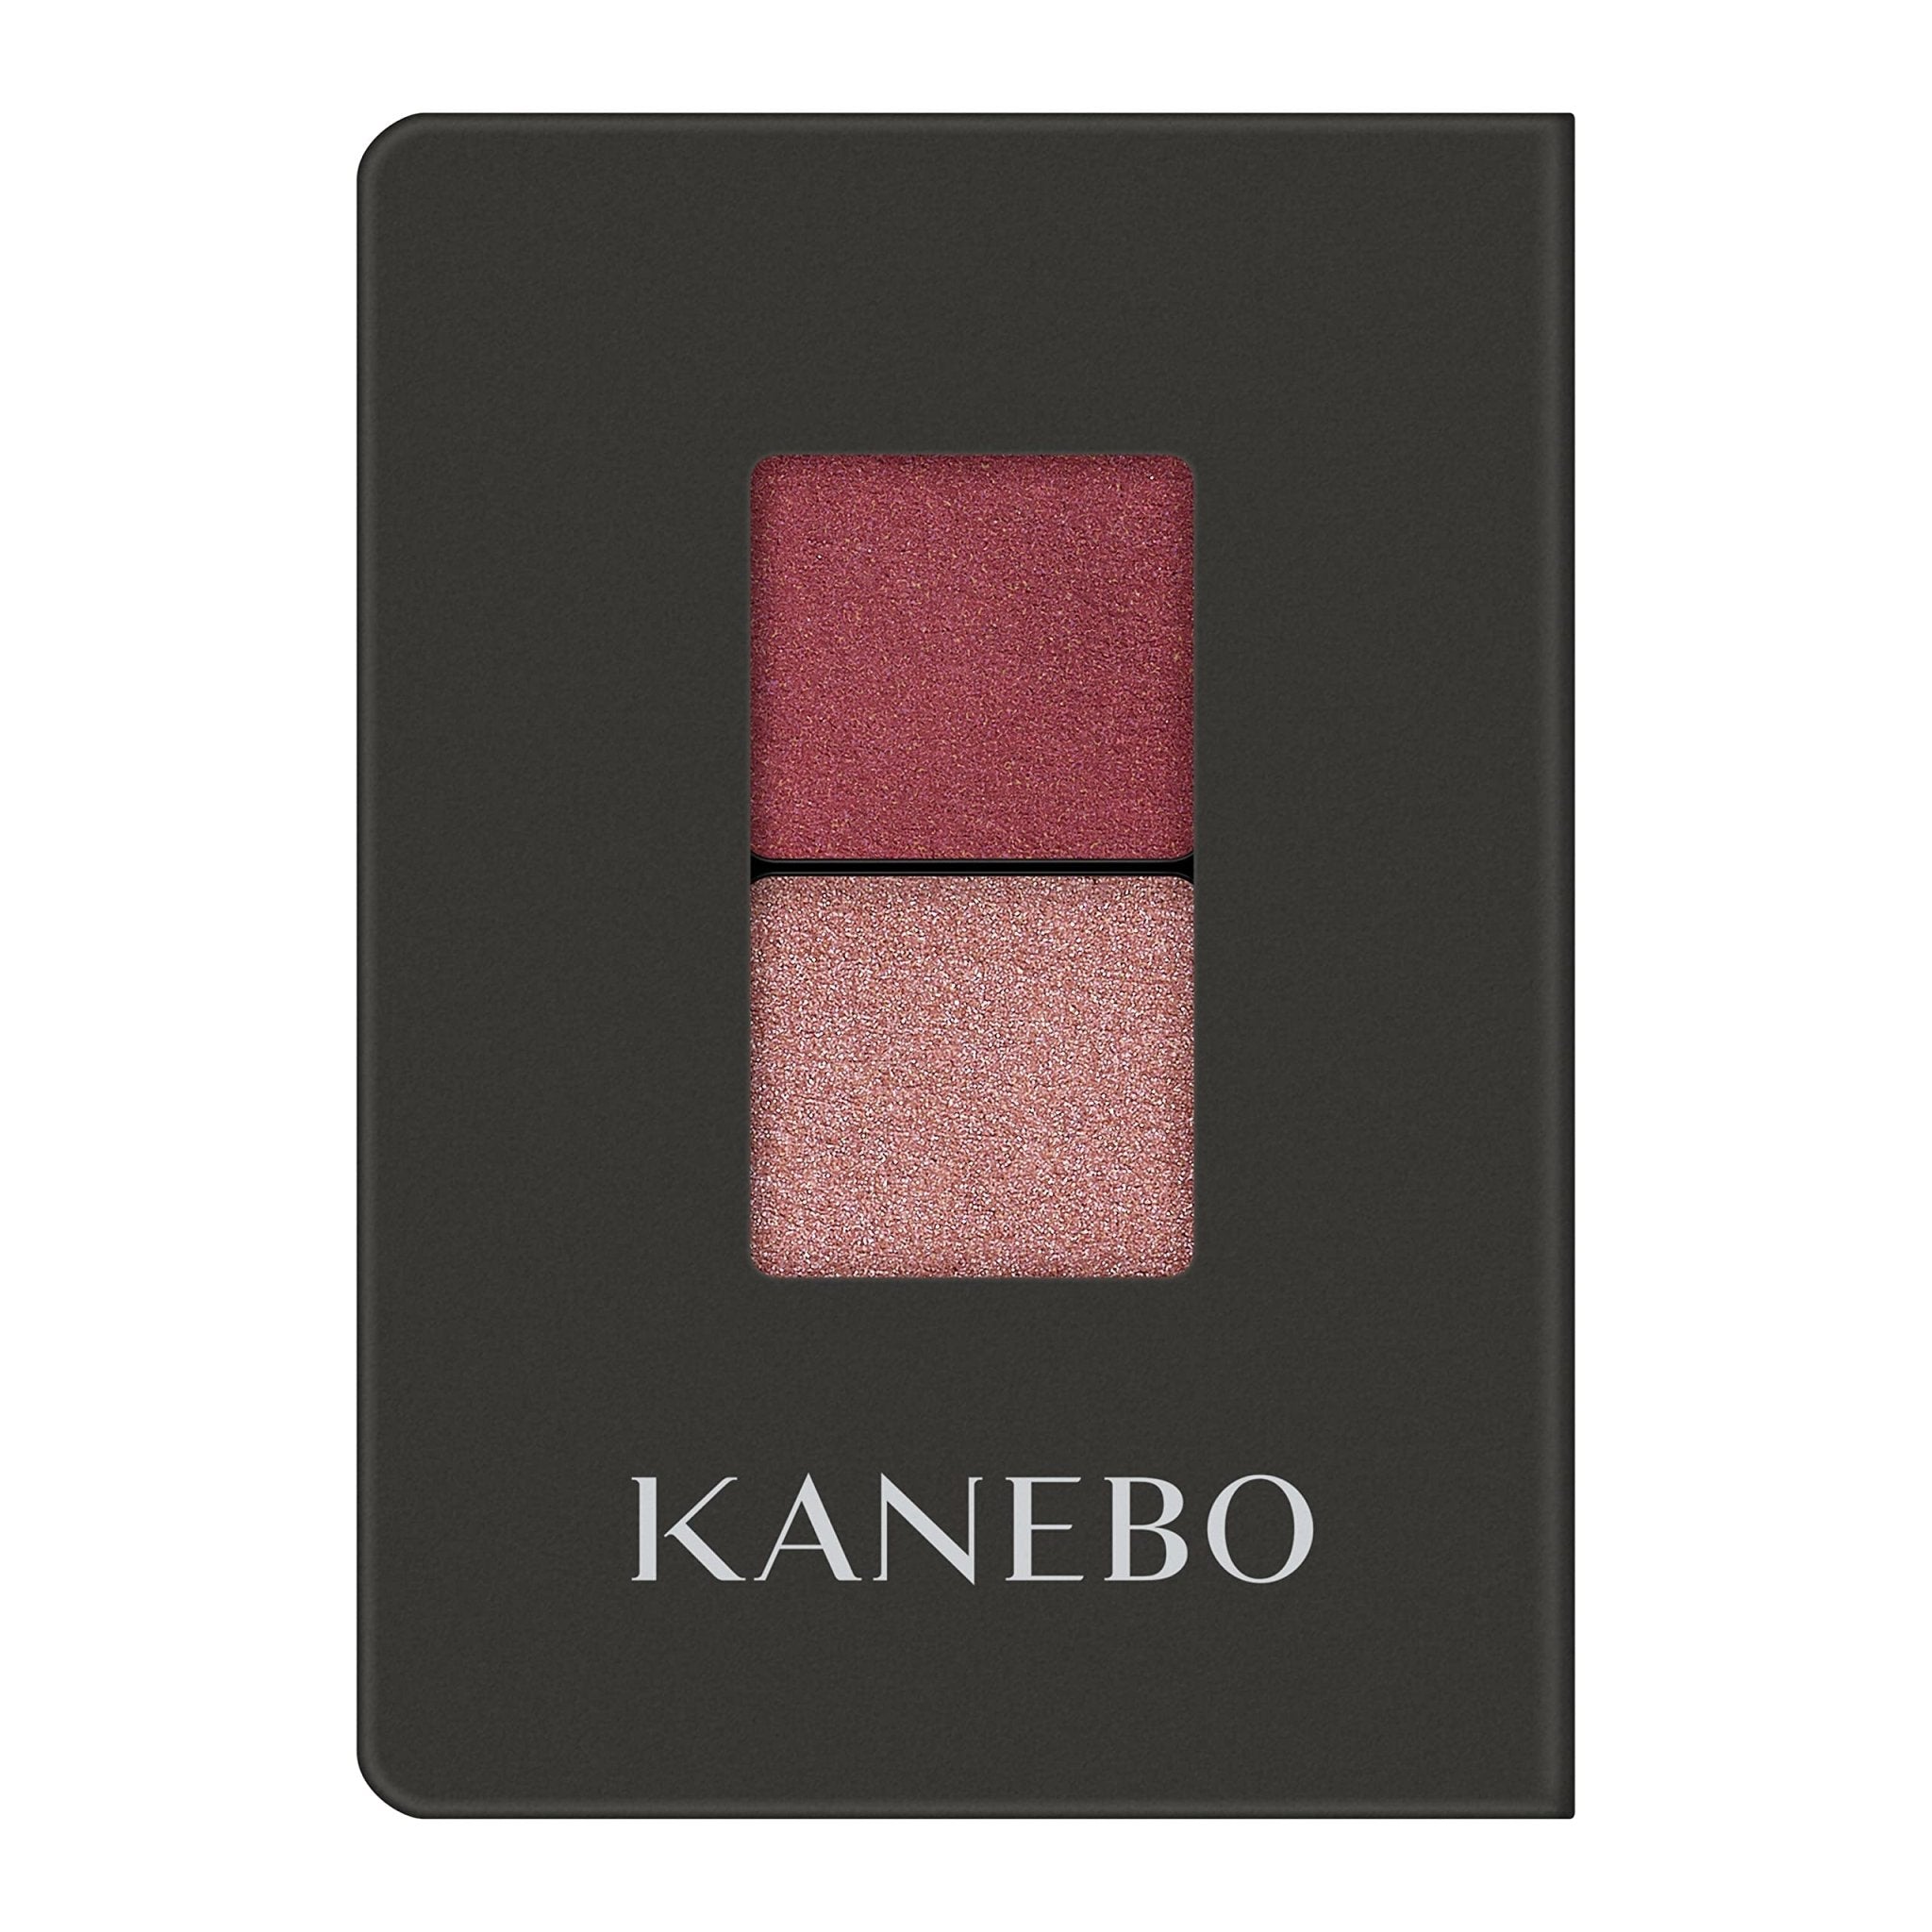 Kanebo Majestic Ruby Eye Shadow Duo 1.4G - Vibrant Color Compact